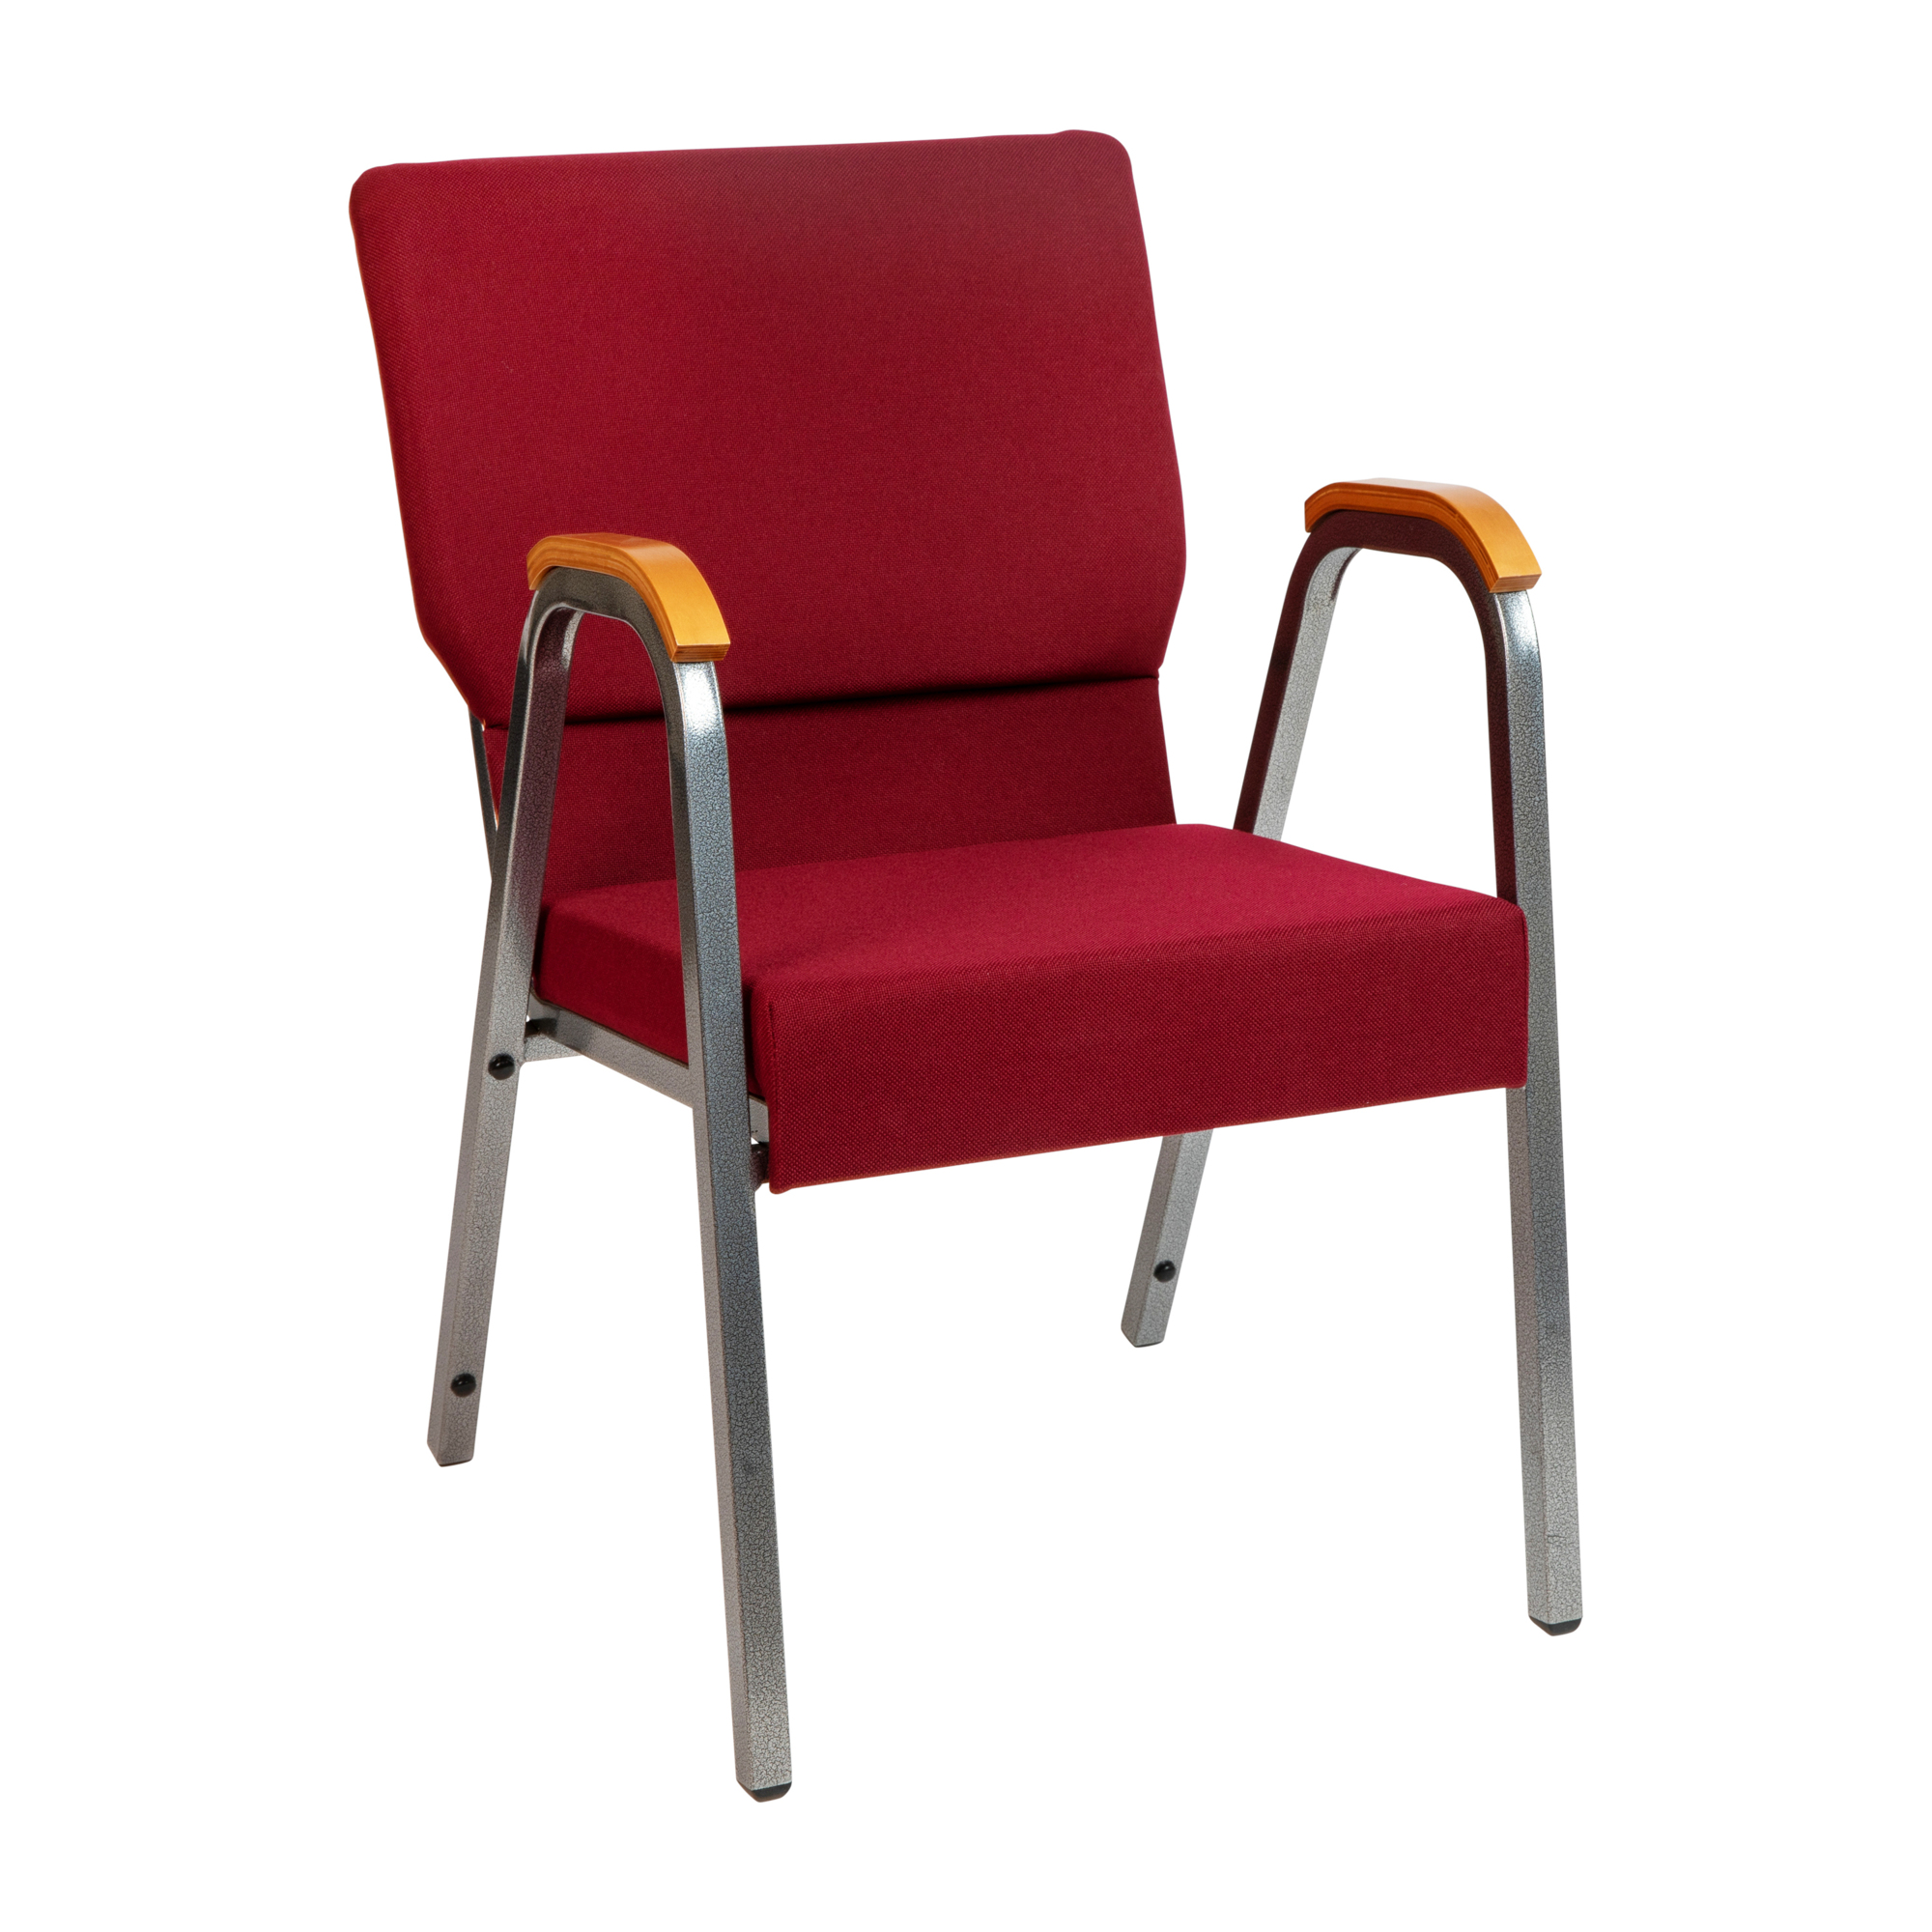 Flash Furniture, Burgundy Fabric Stackable Church Chair with Arms, Primary Color Burgundy, Included (qty.) 1, Model XUDG60156BUR